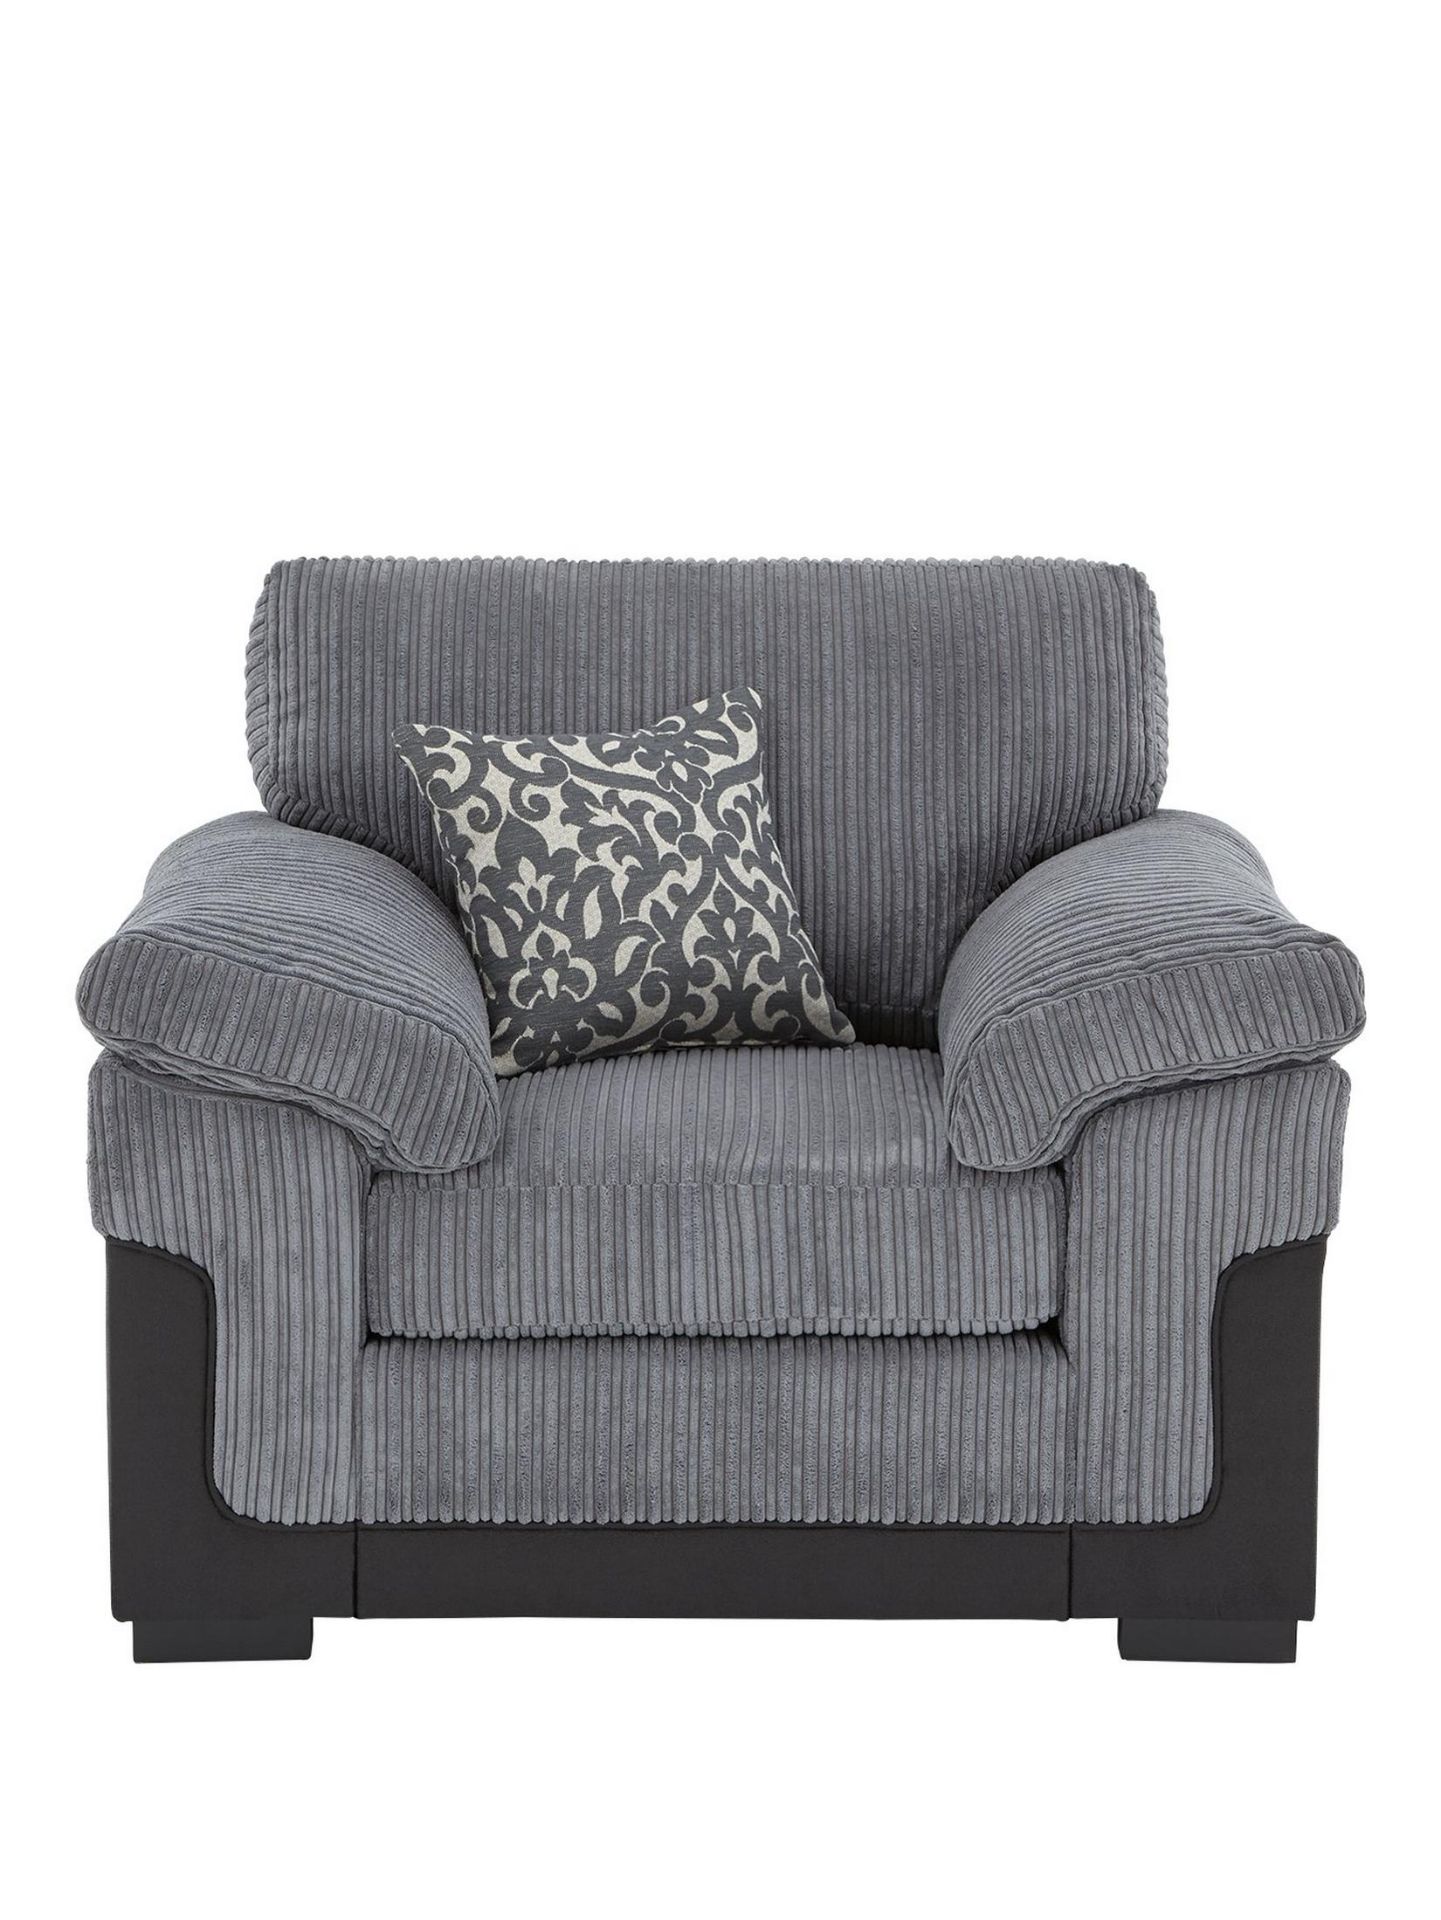 Phoenix Chair. RPP £509.00. Fabric fusion Chunky lines of soft jumbo cord give the inner a - Image 2 of 3